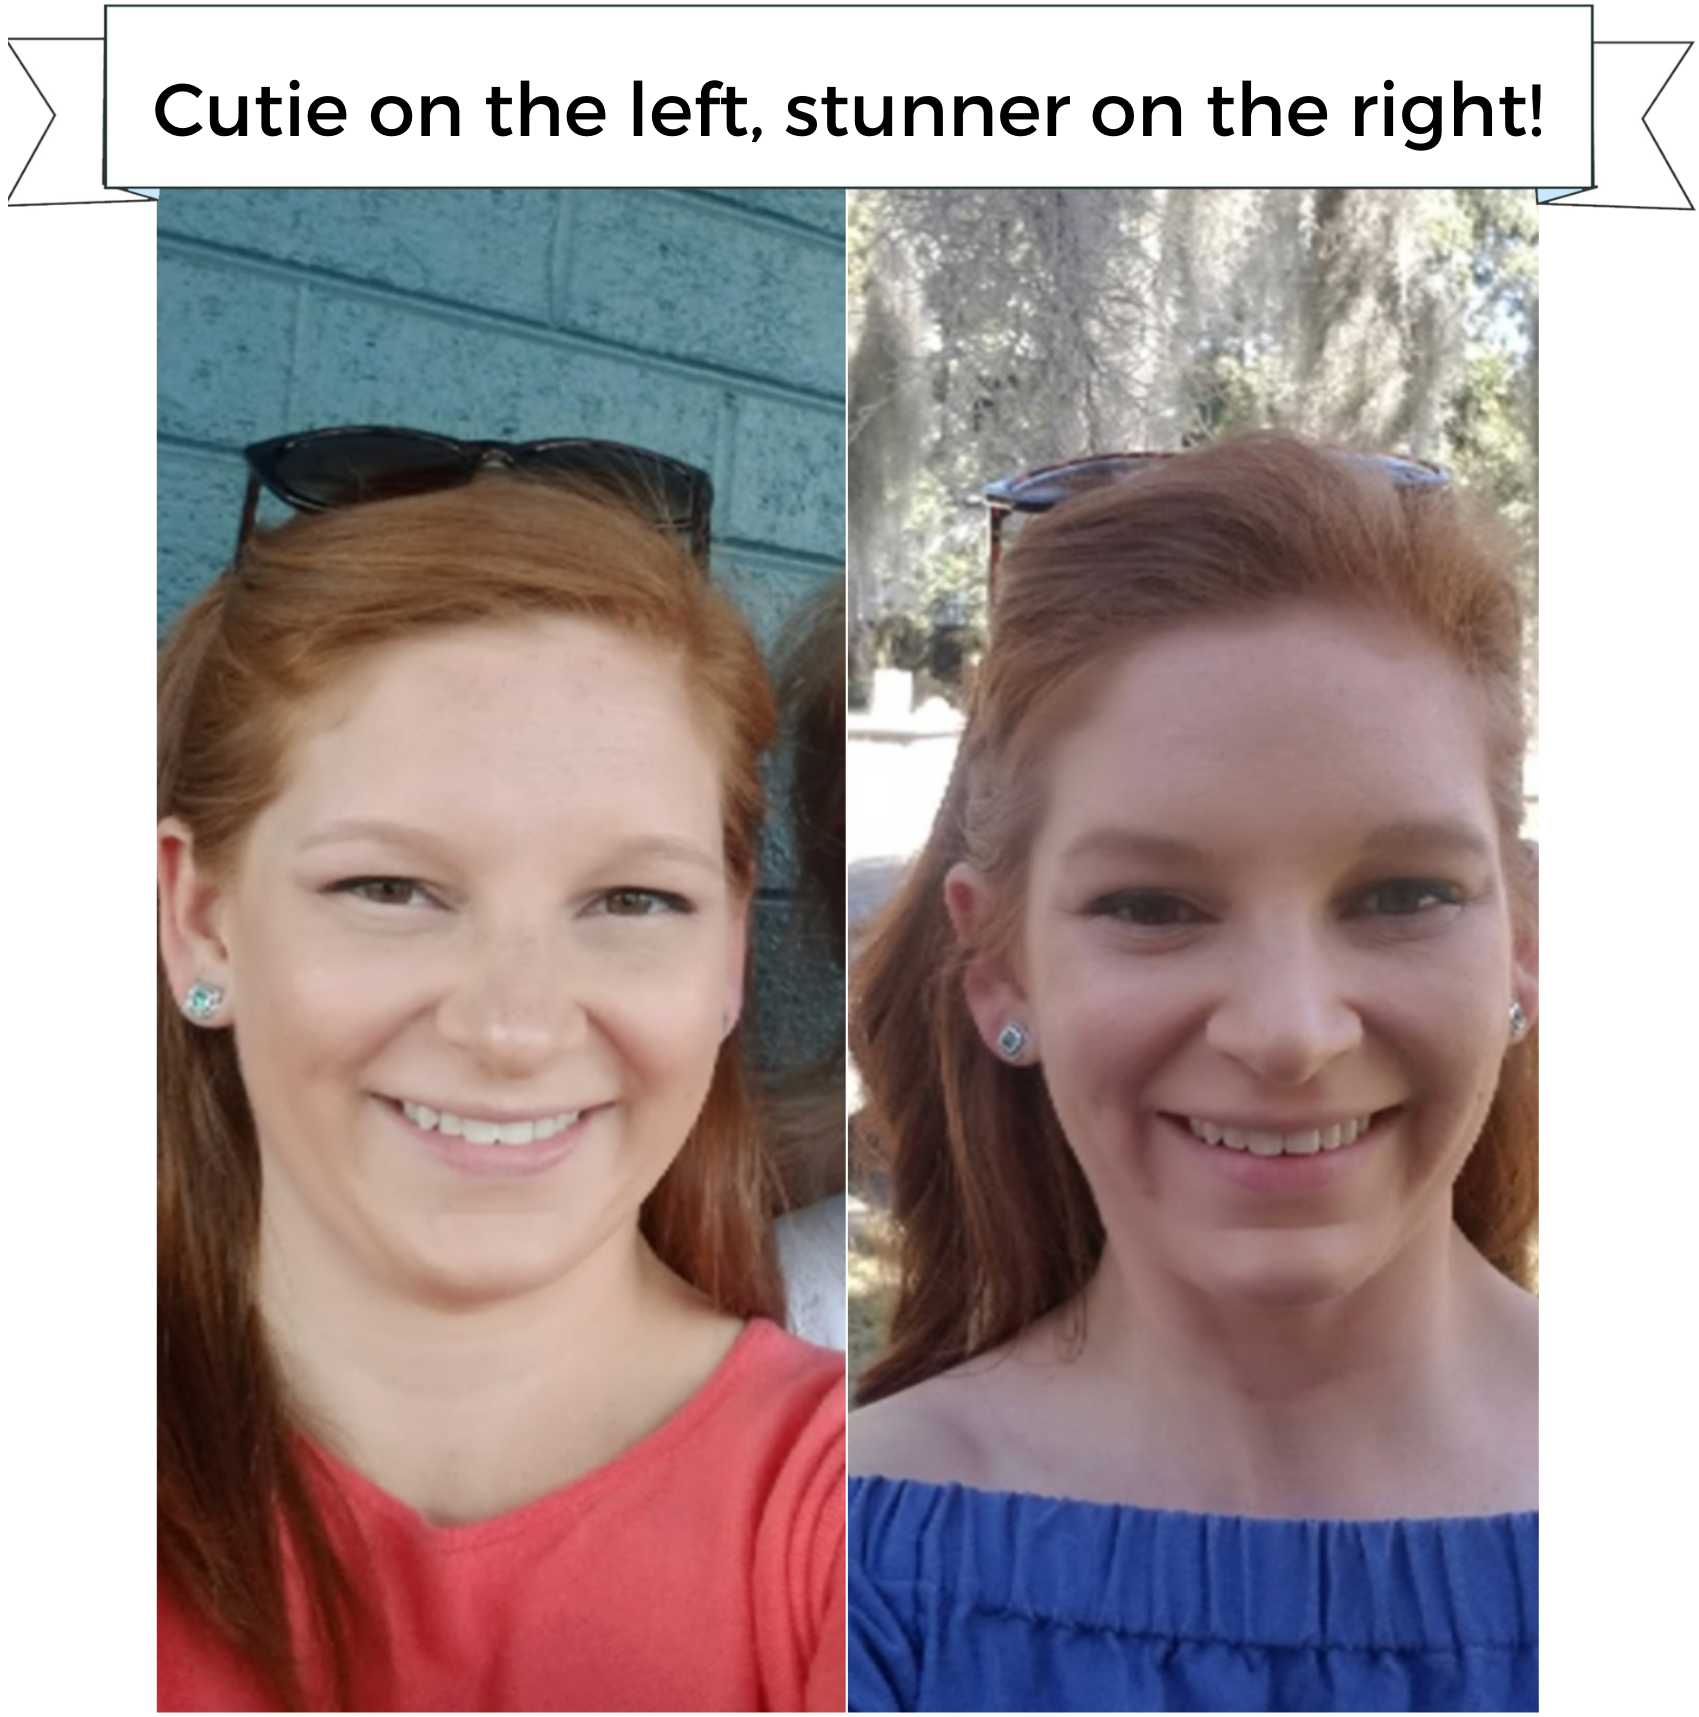 Before & after photos showing cutie on the left, stunner on the right